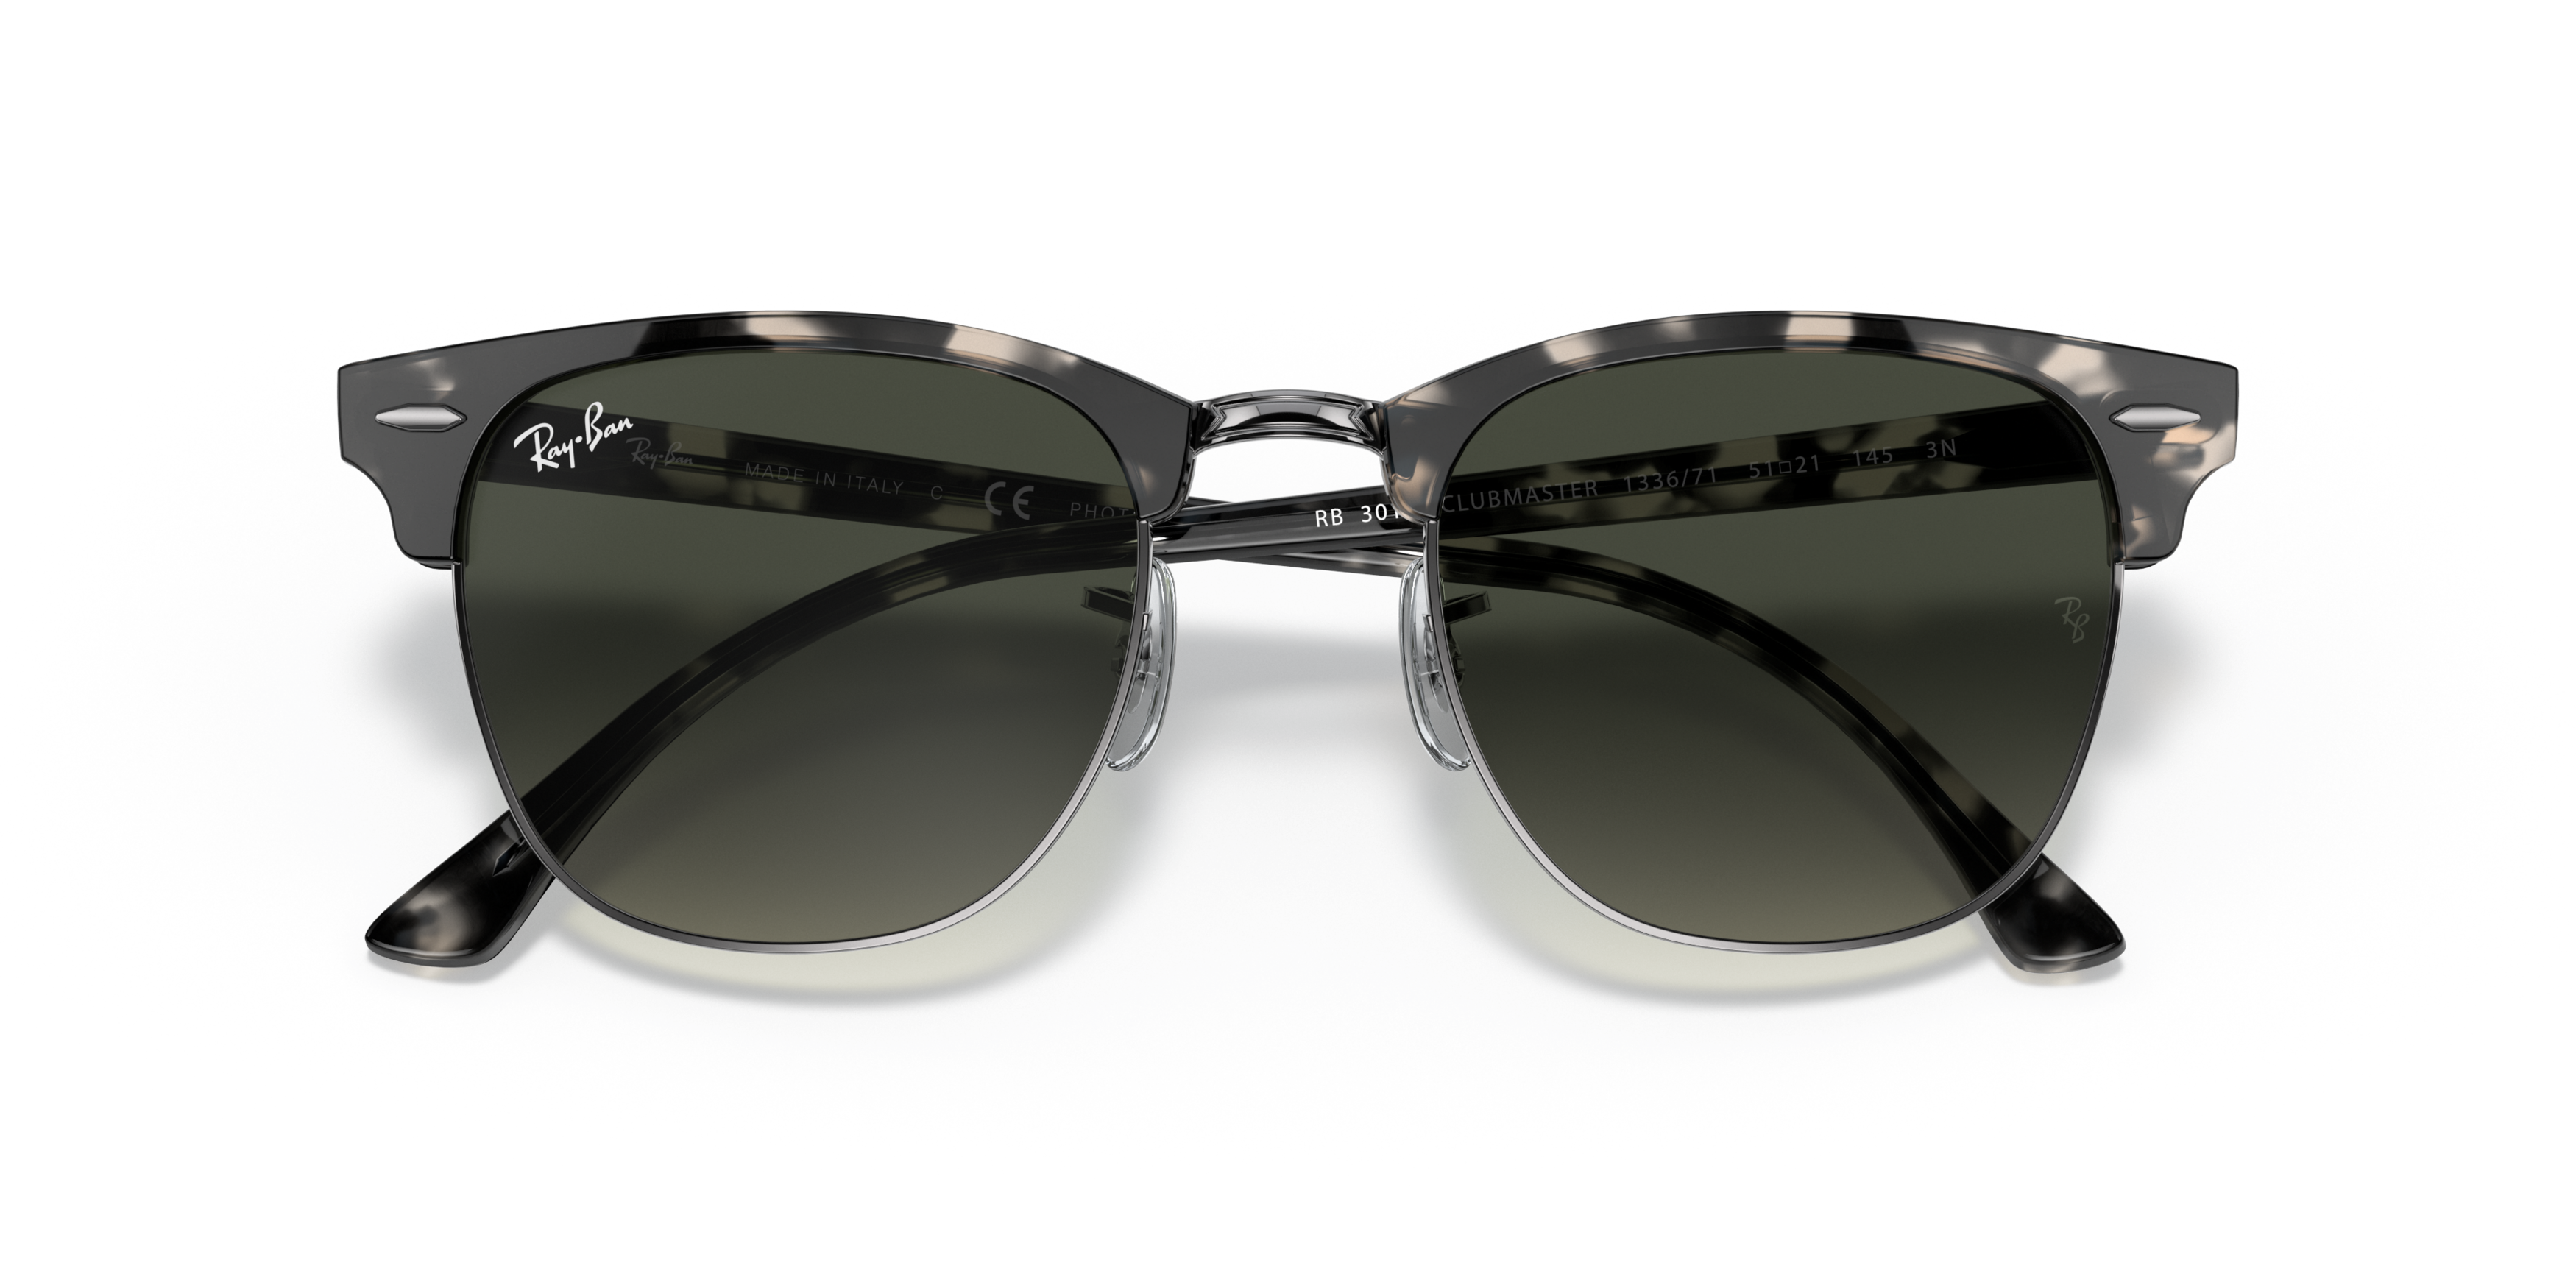 [products.image.folded] Ray-Ban Clubmaster RB3016 133671